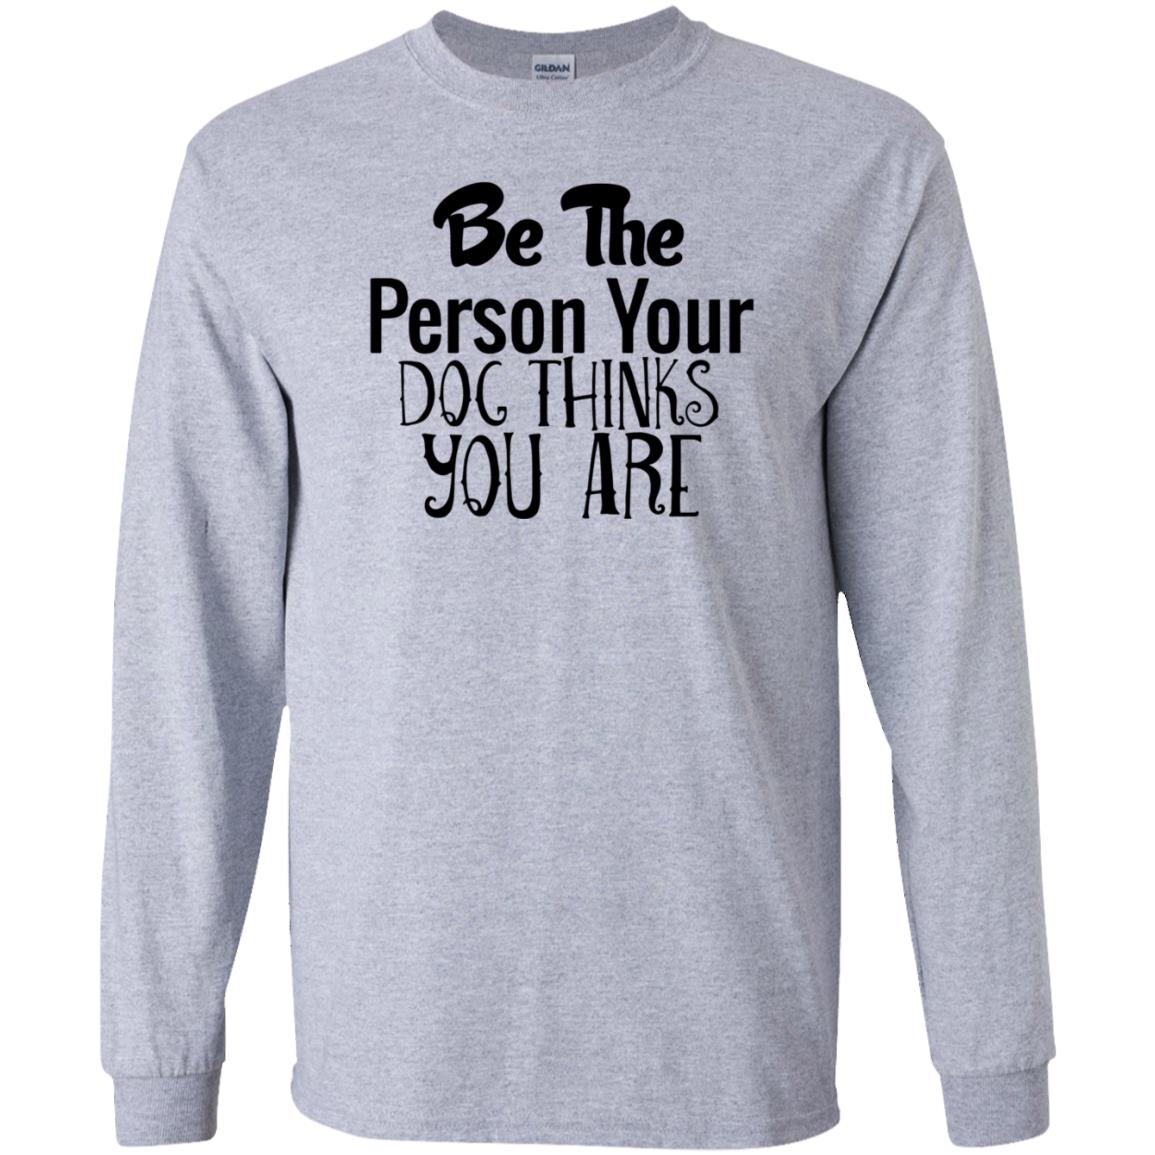 Be The Person Your Dog Thinks You Are Shirt - 10% Off - FavorMerch